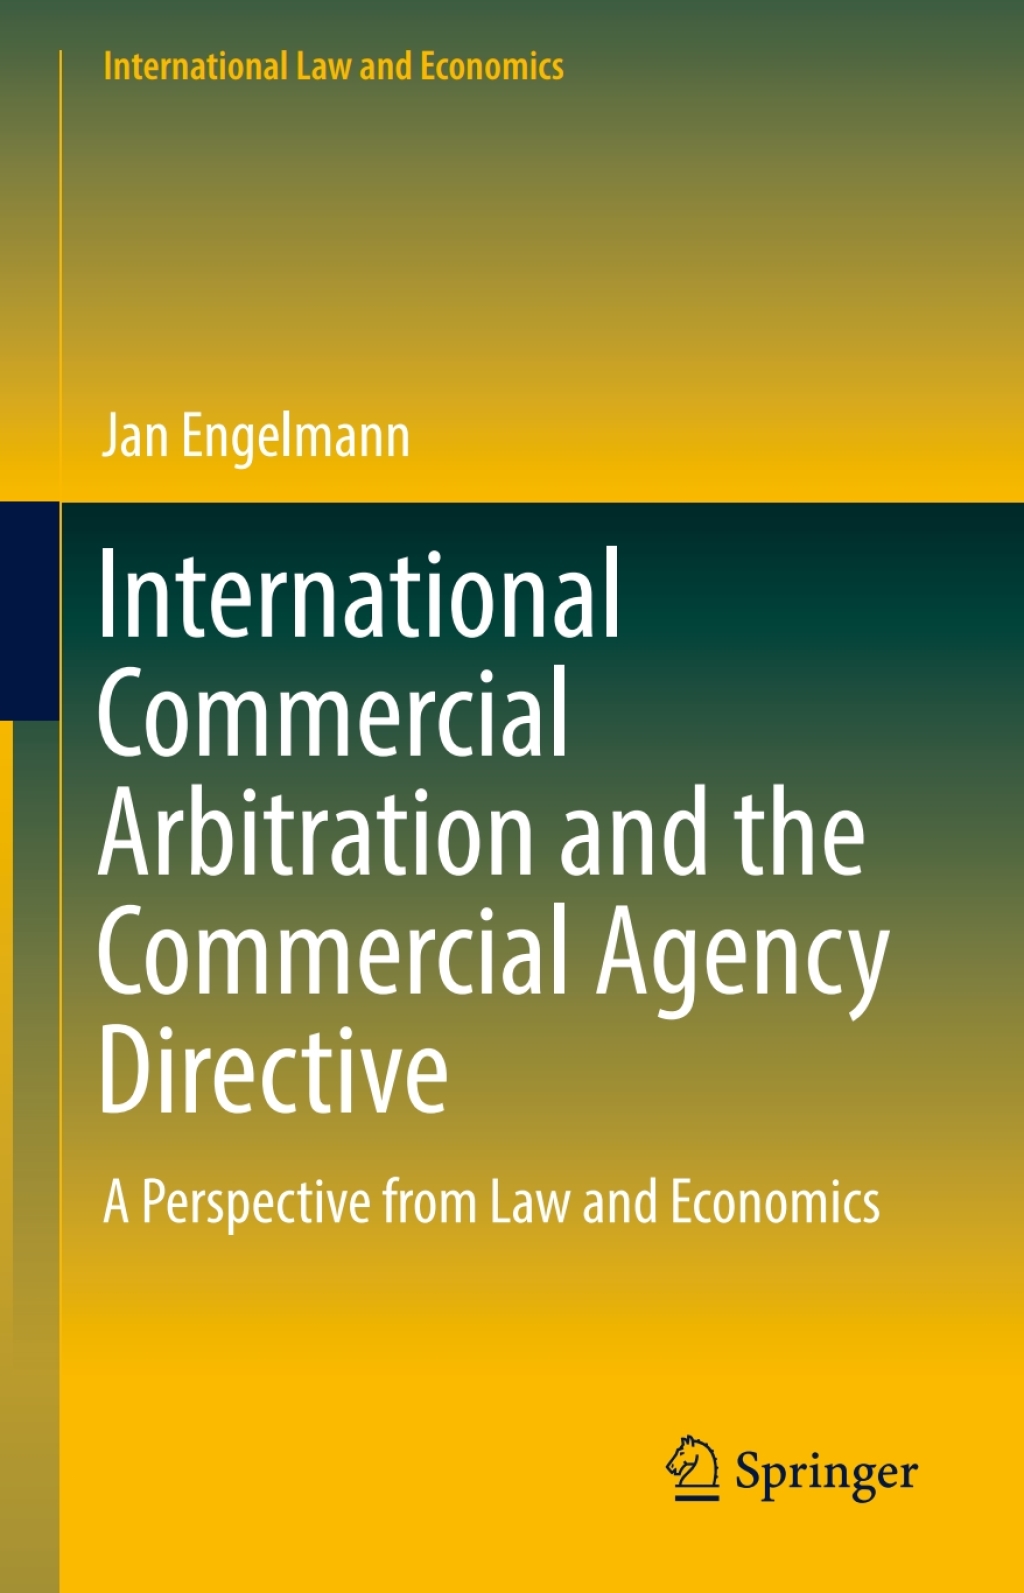 International Commercial Arbitration and the Commercial Agency Directive (eBook Rental) - Jan Engelmann,